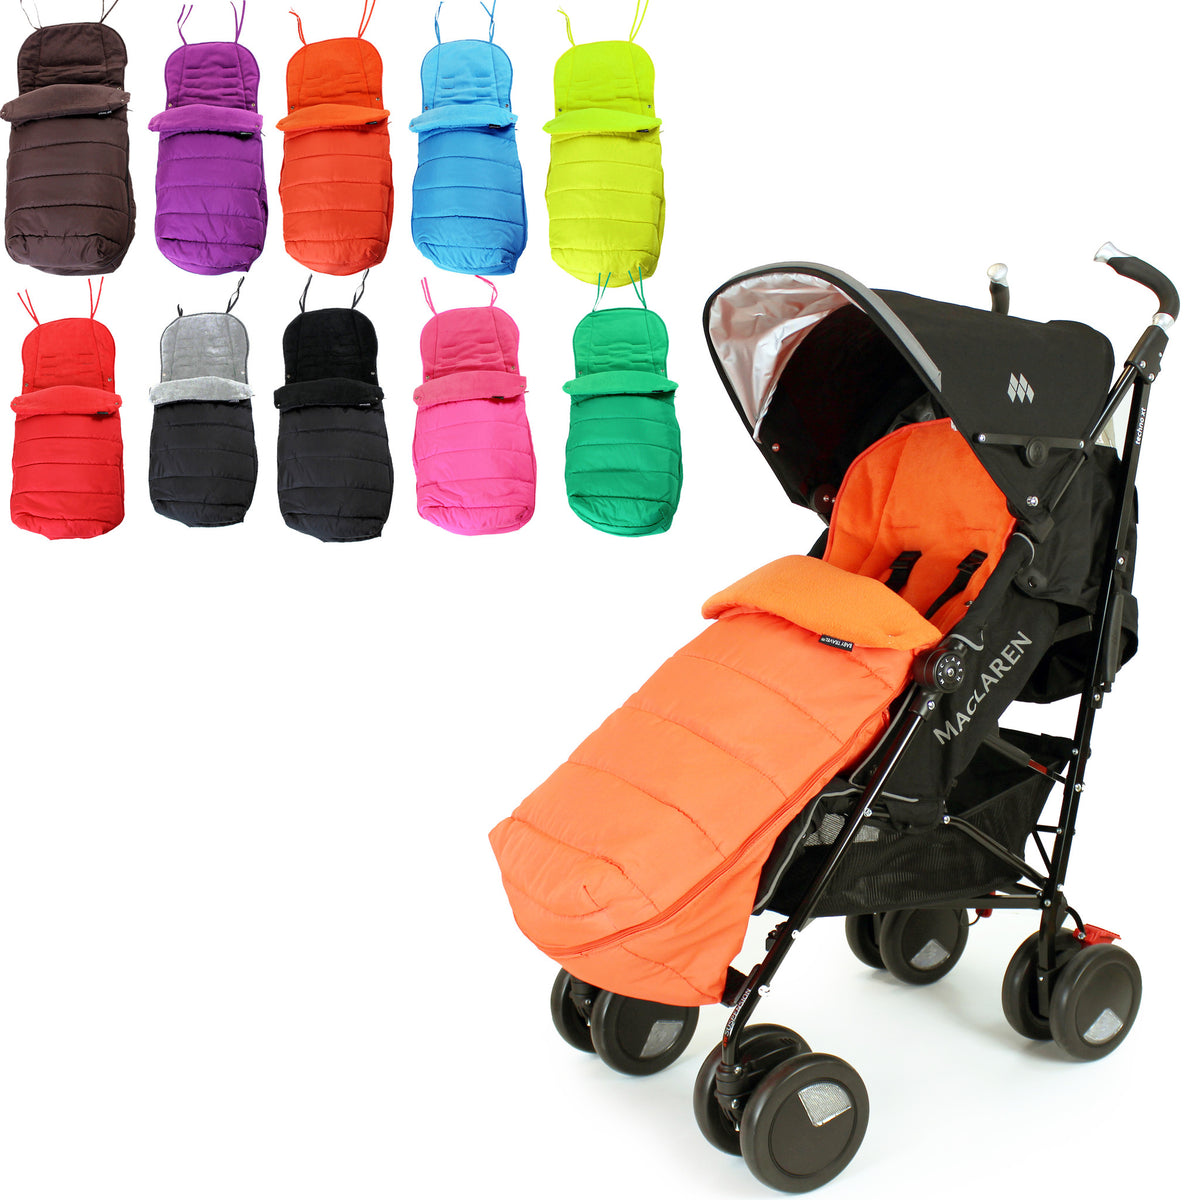 Universal Baby Stroller car seat cosytoes Liner Buggy Luxury Footmuff C0G 